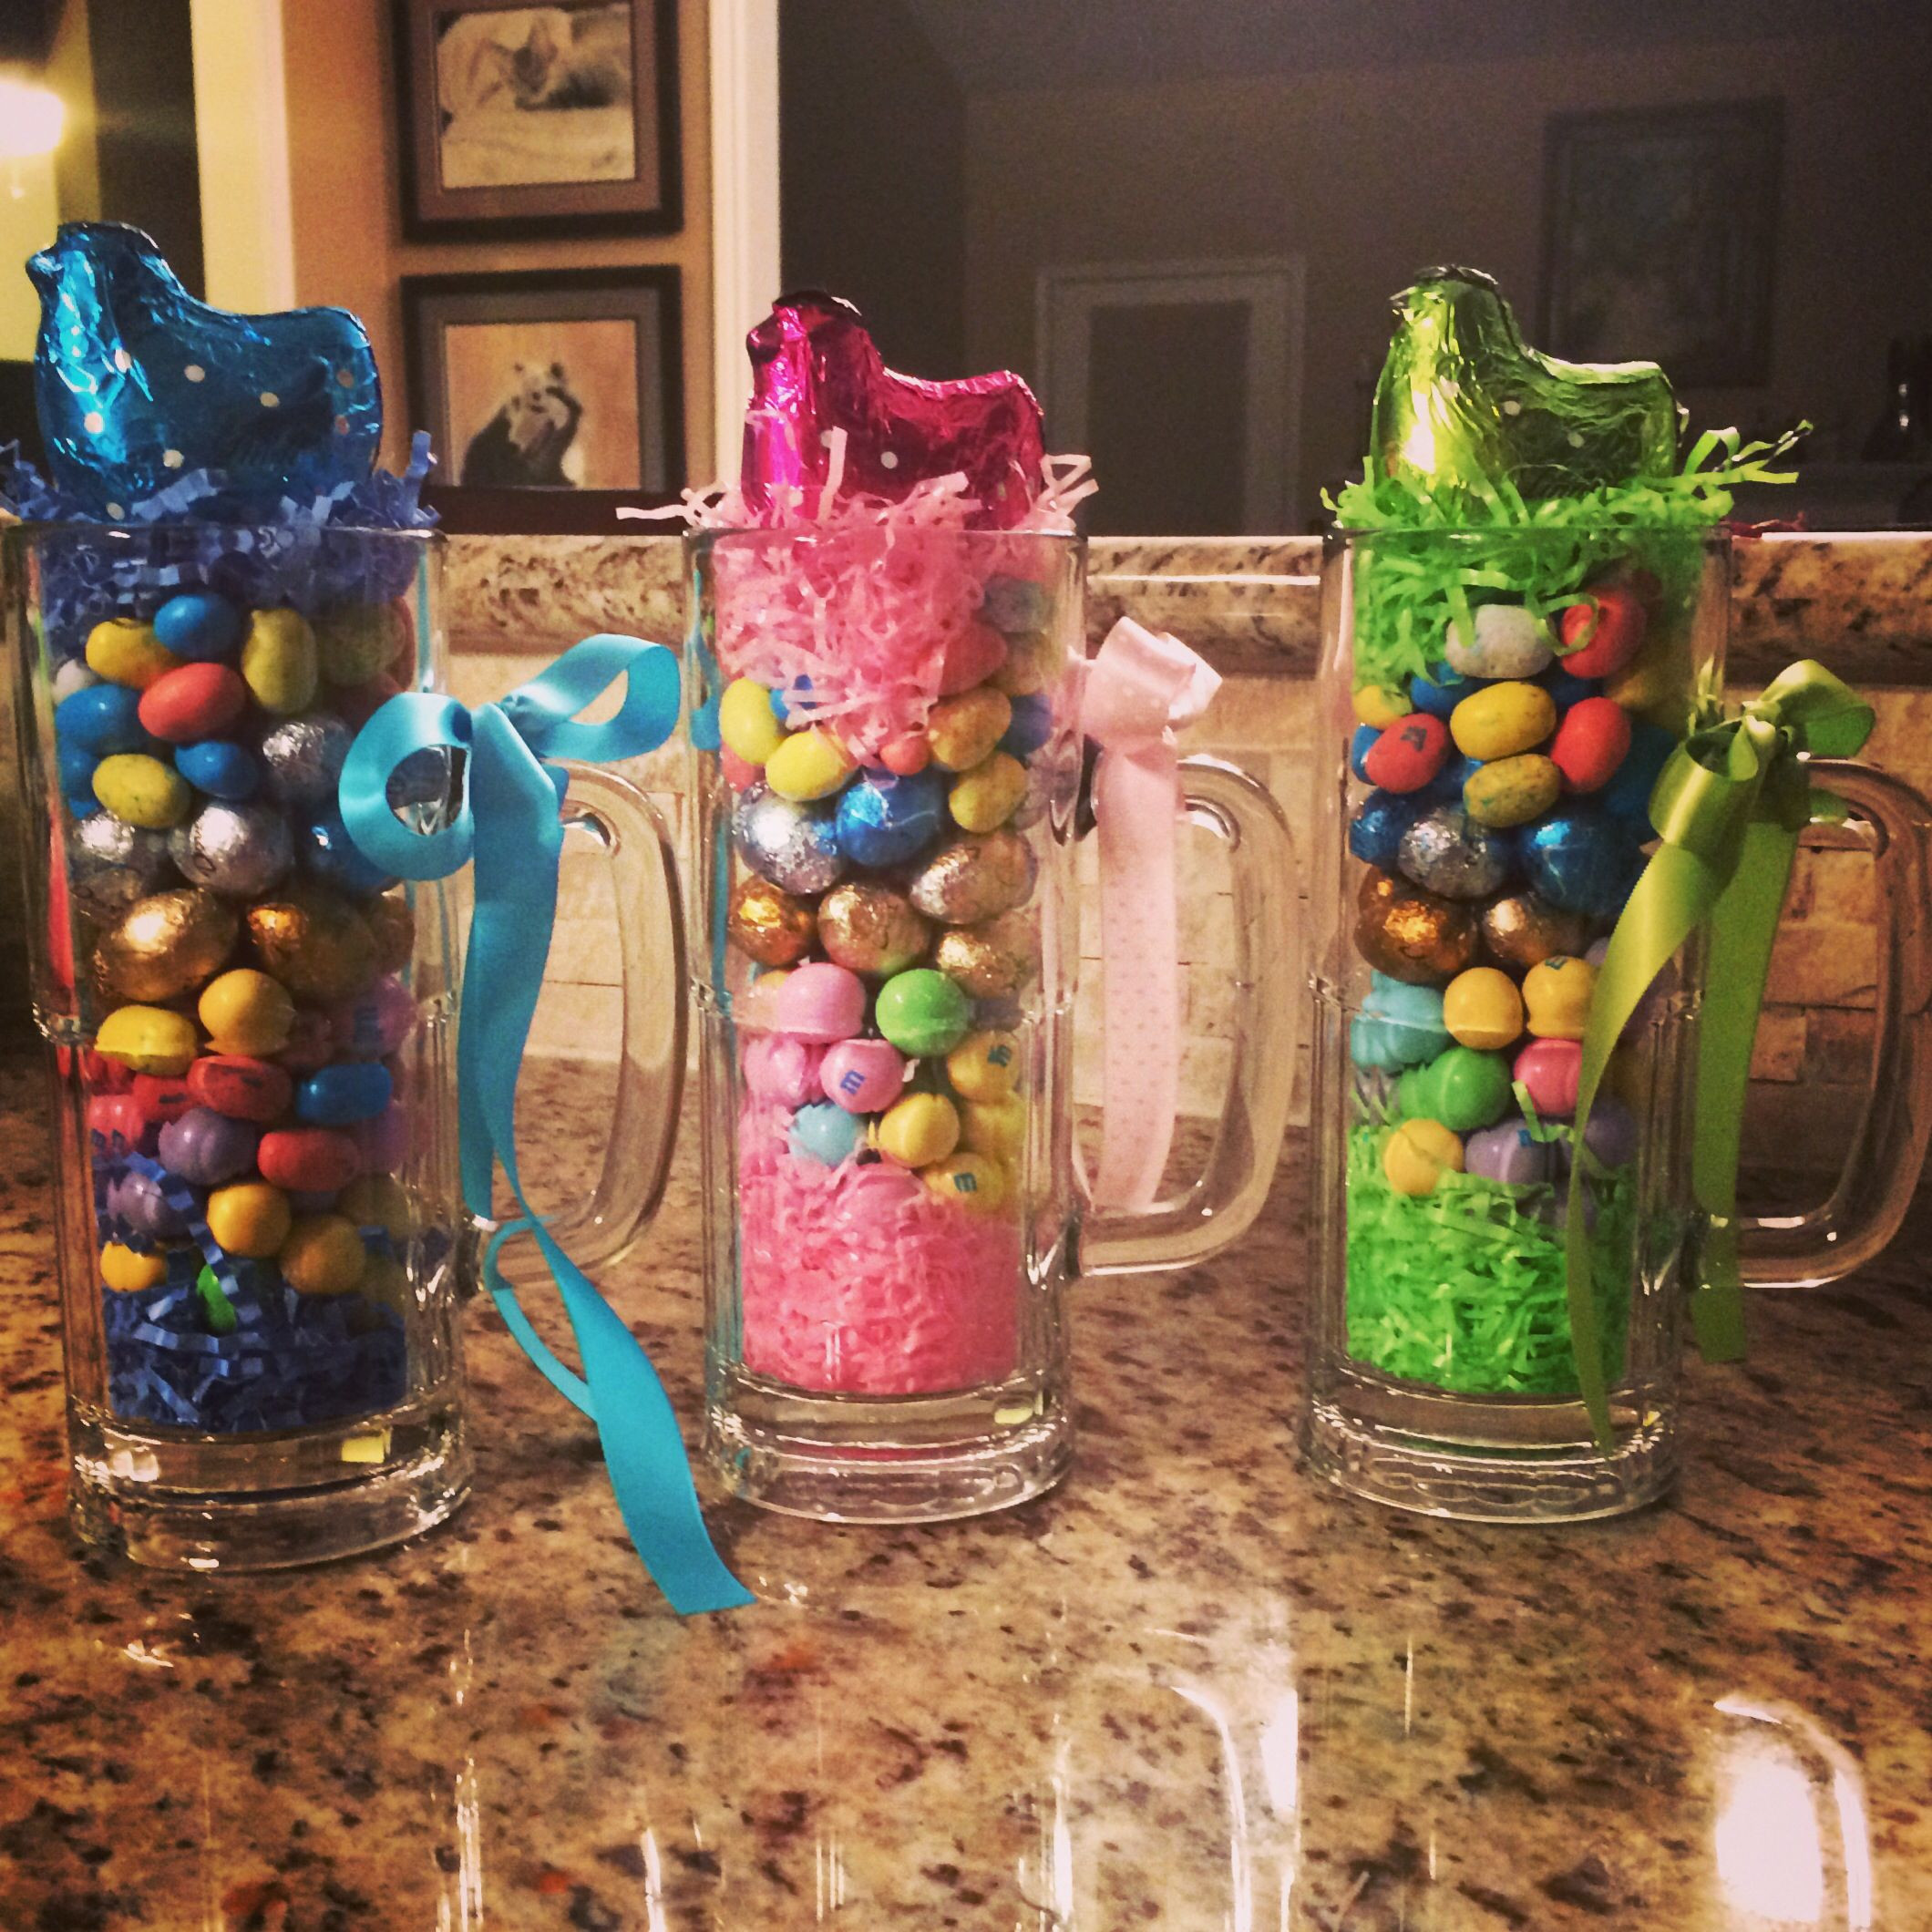 Spring Birthday Party Ideas For Adults
 Grown Up "Easter Basket " great Spring party favors for